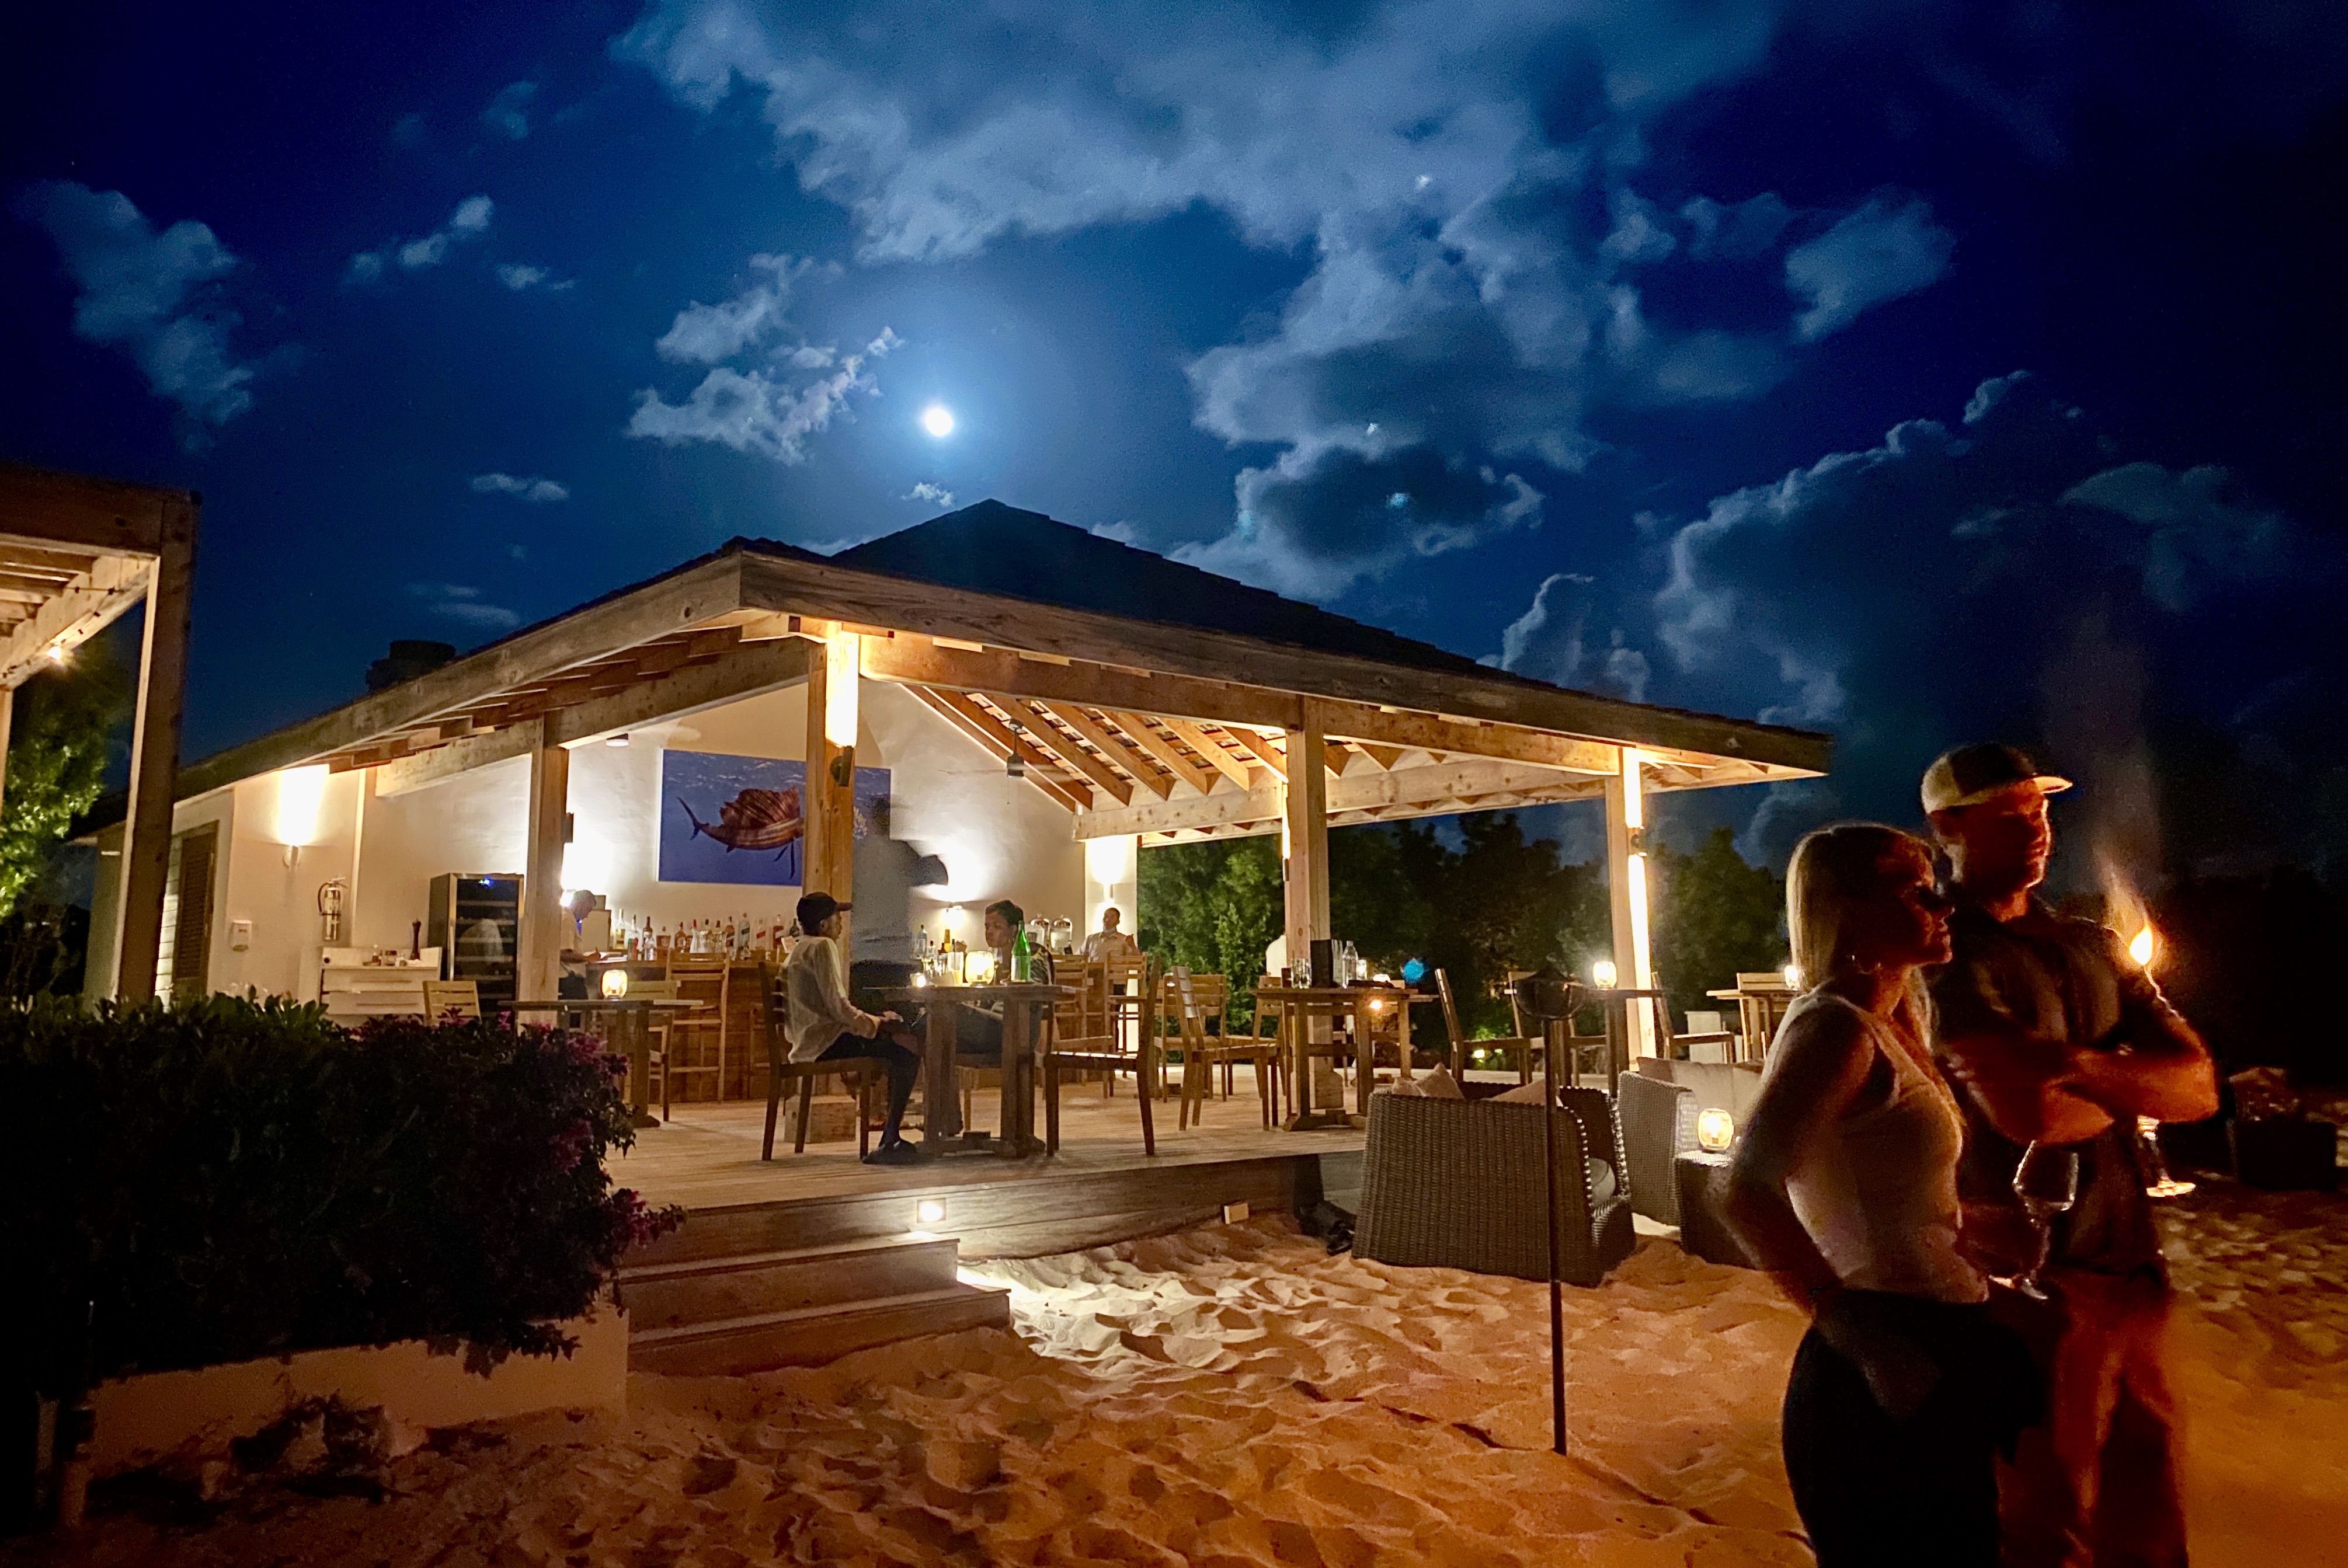 Guests at Sailrock Resort in South Caicos gather to make s'mores at the Cove beach bar.